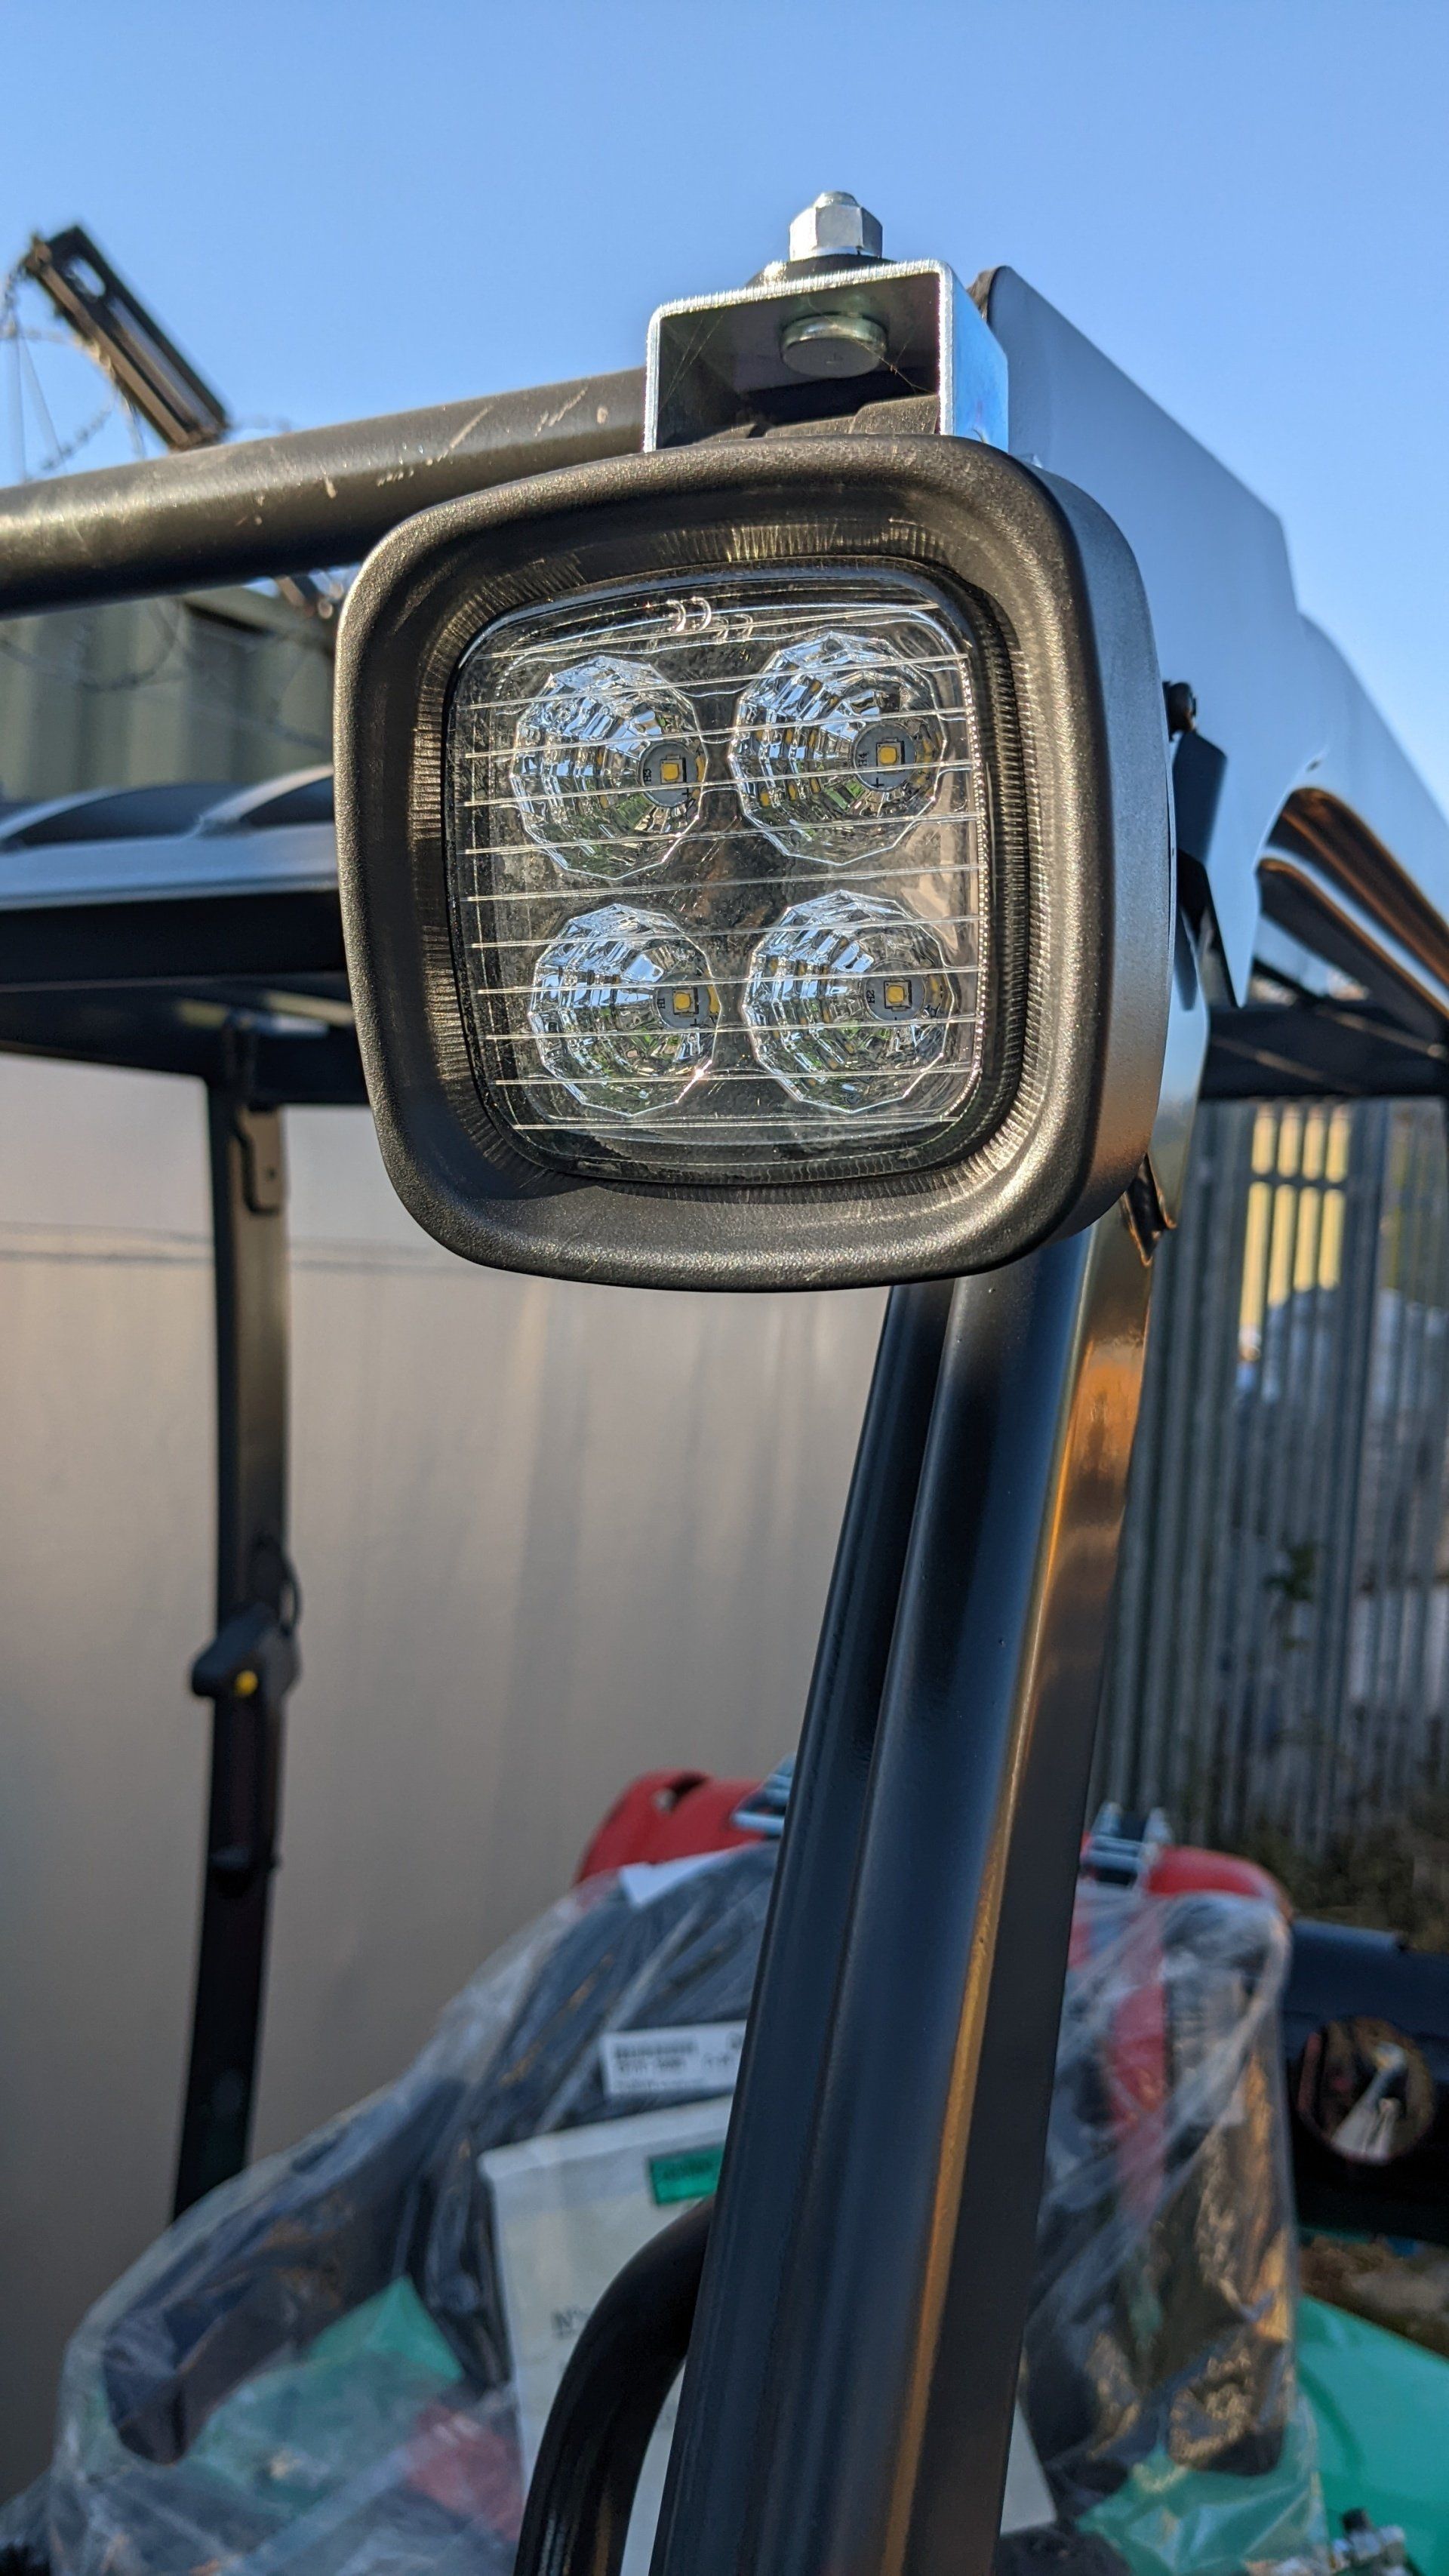 A close up of a forklift headlight on a forklift.